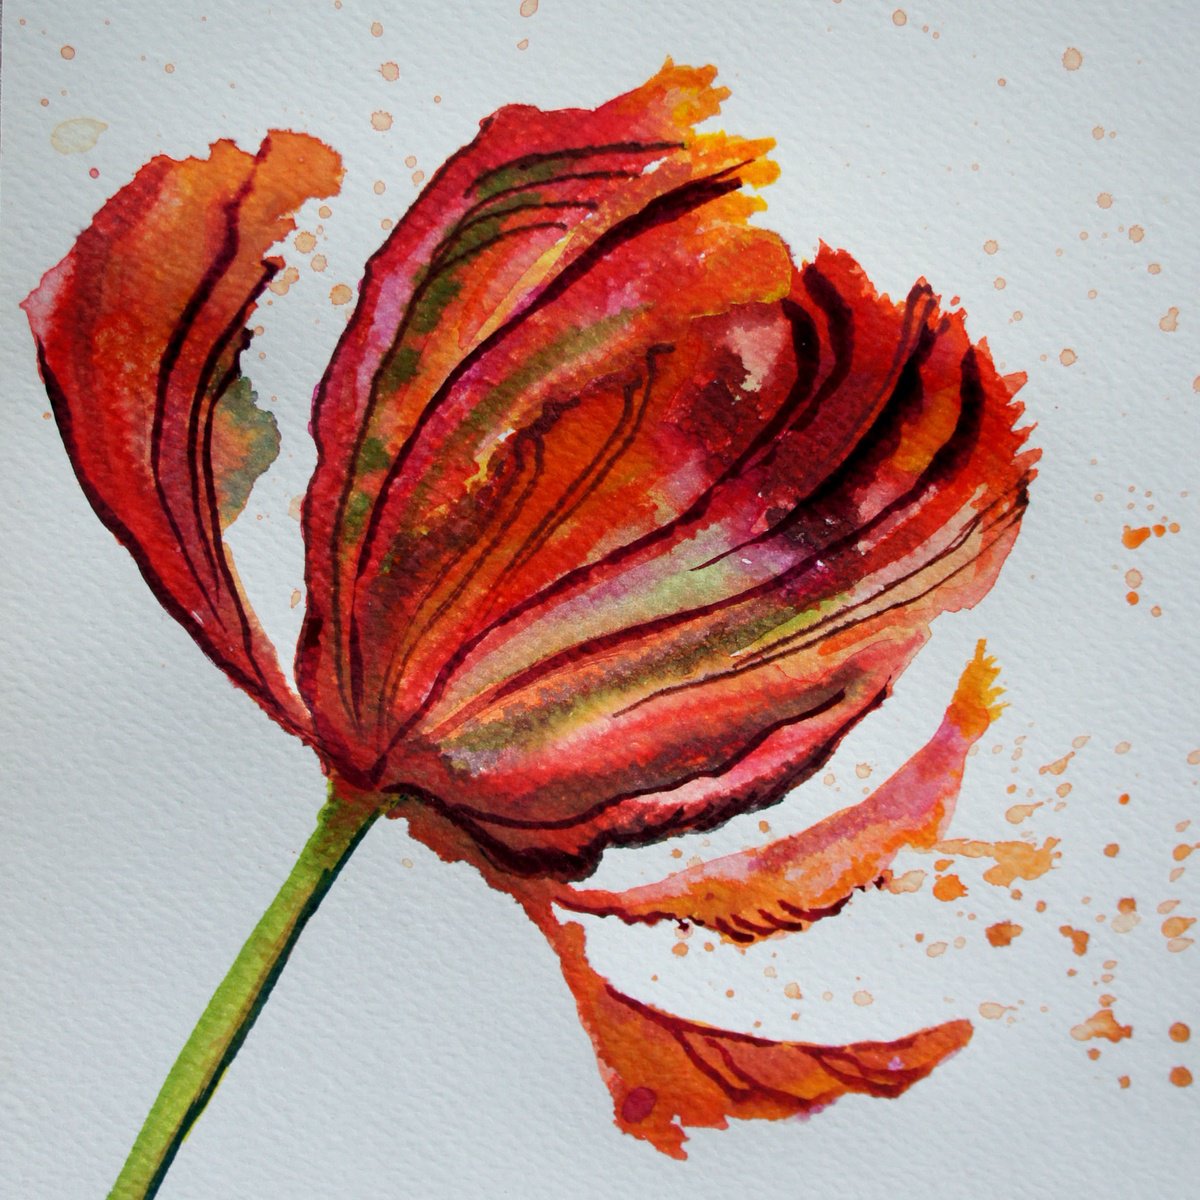 Parrot Tulip by Julia Rigby